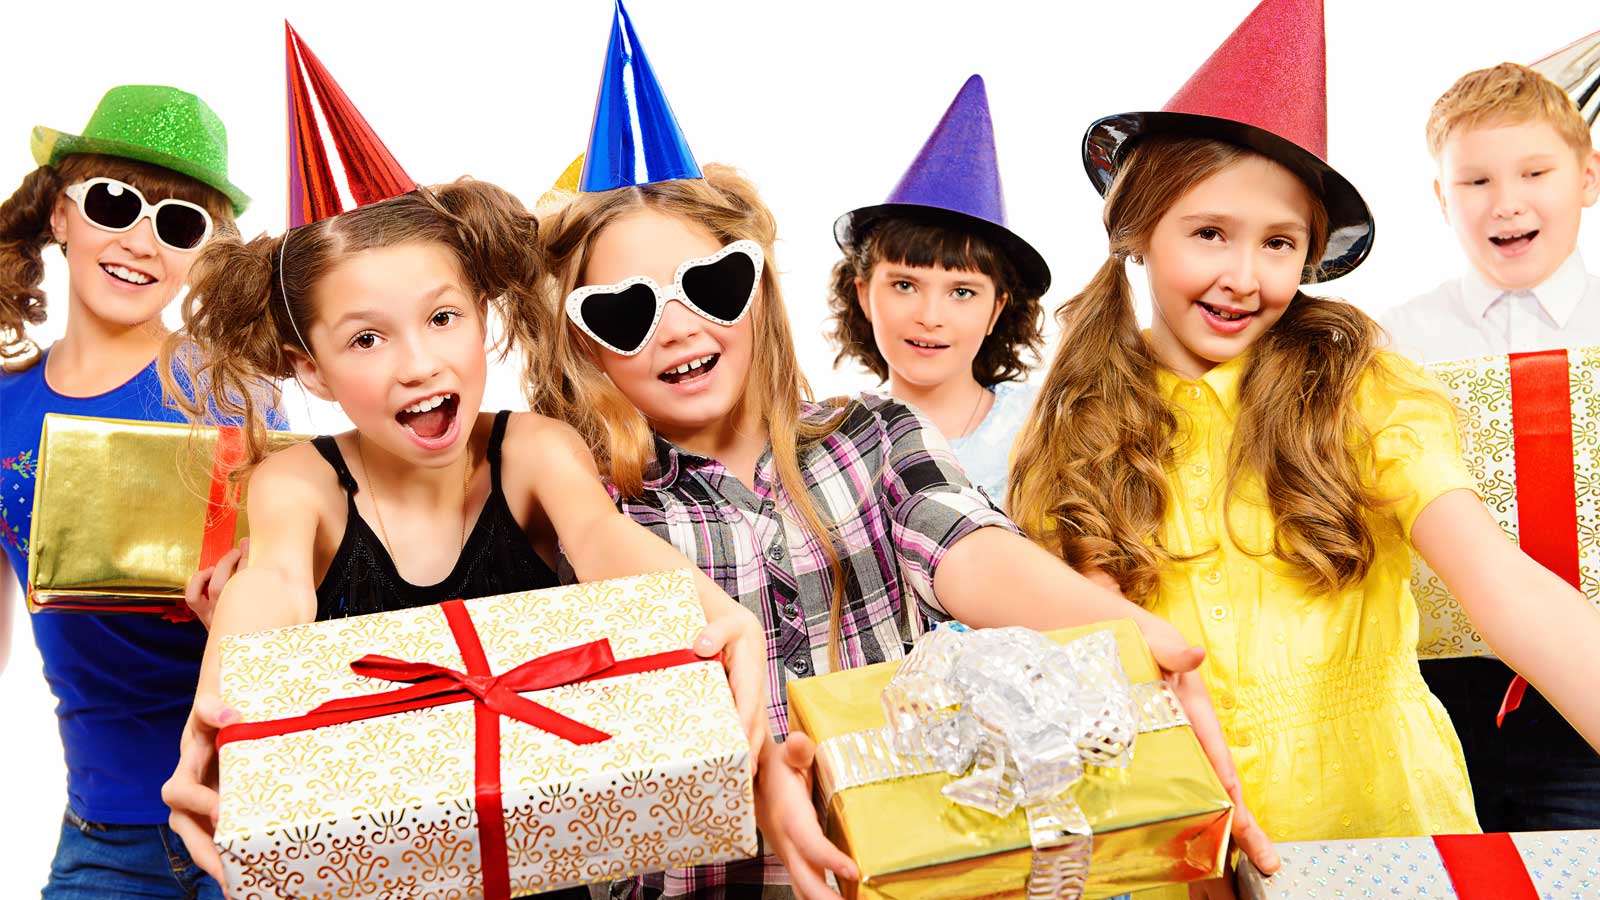 How to Buy the Right Kids Birthday Party Gift